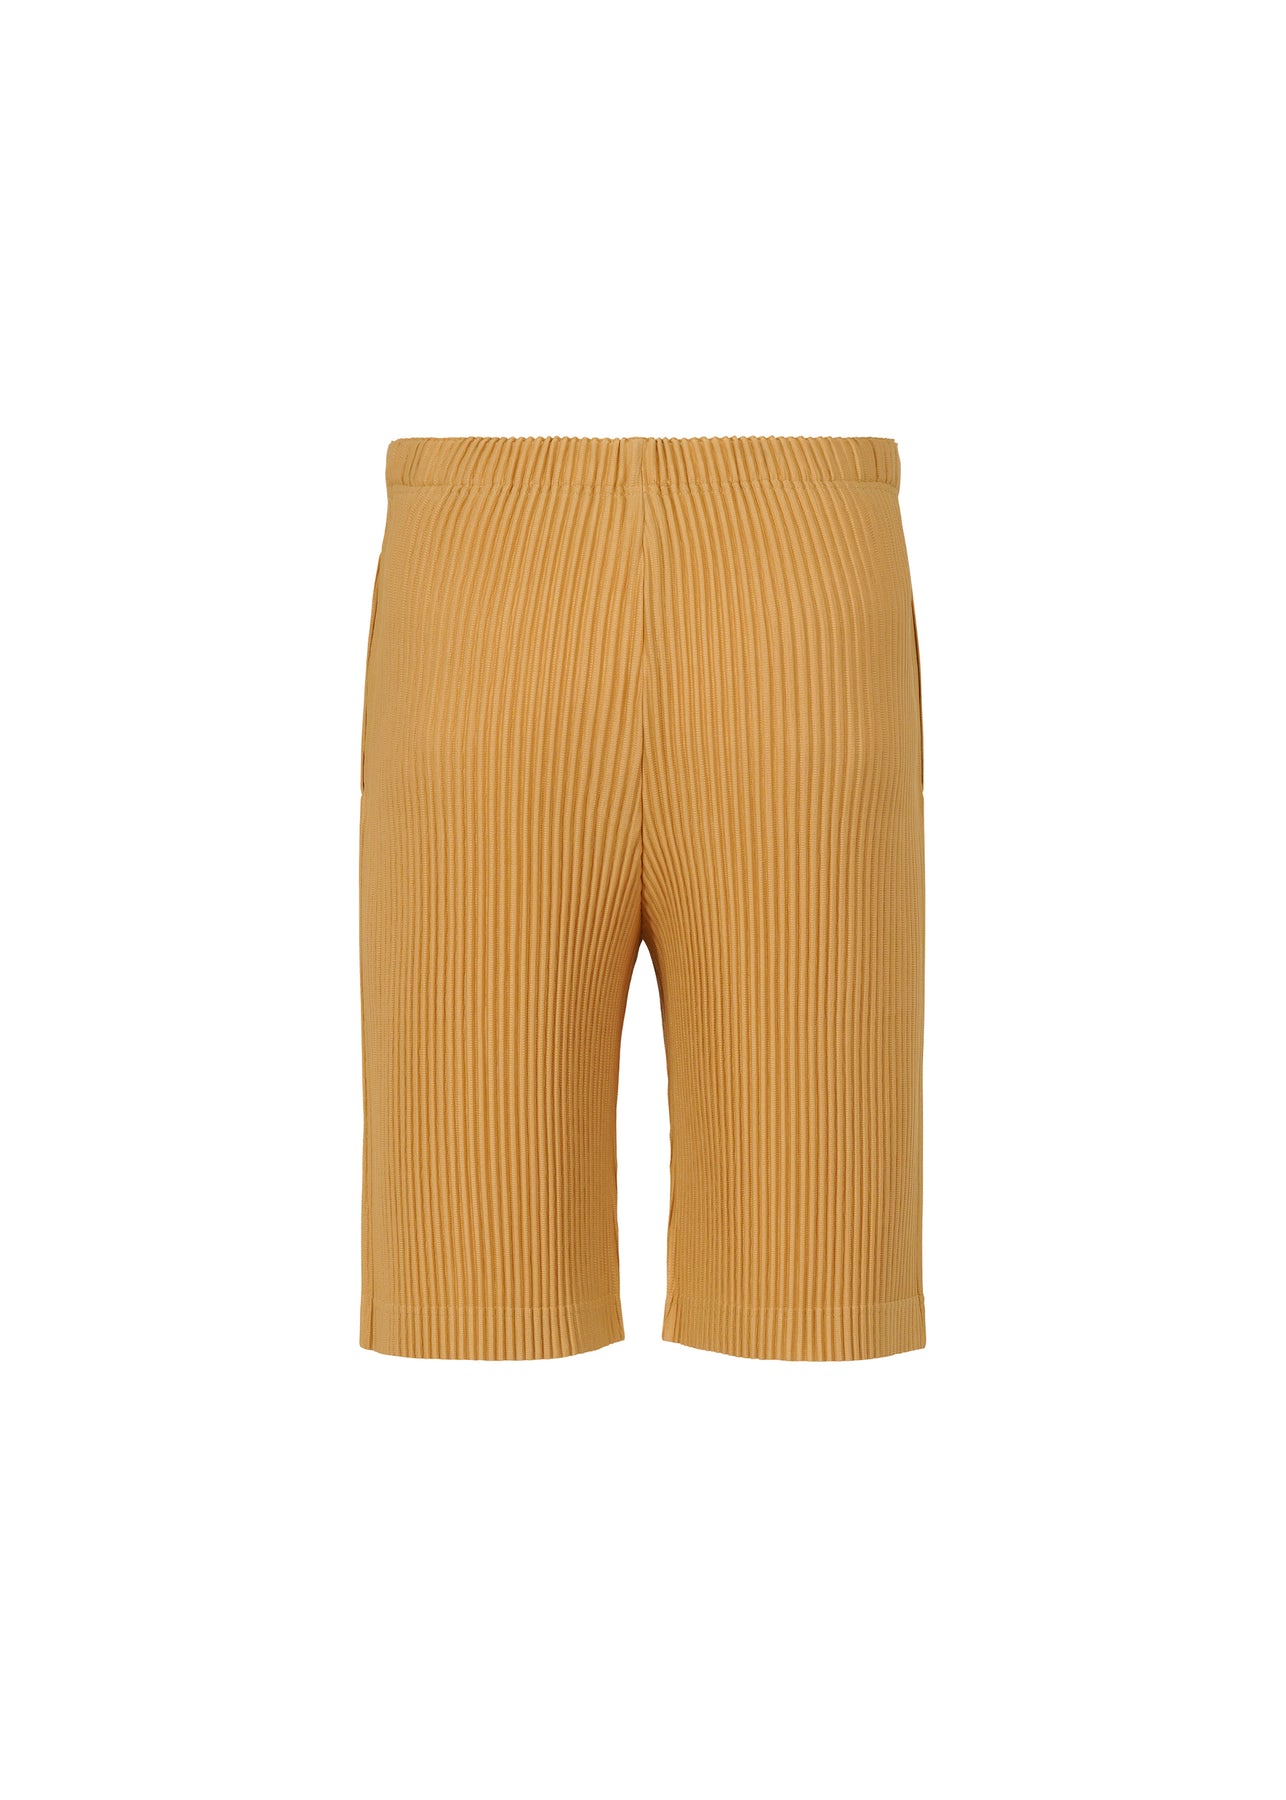 PLEATS BOTTOMS 2 SHORTS | The official ISSEY MIYAKE ONLINE STORE